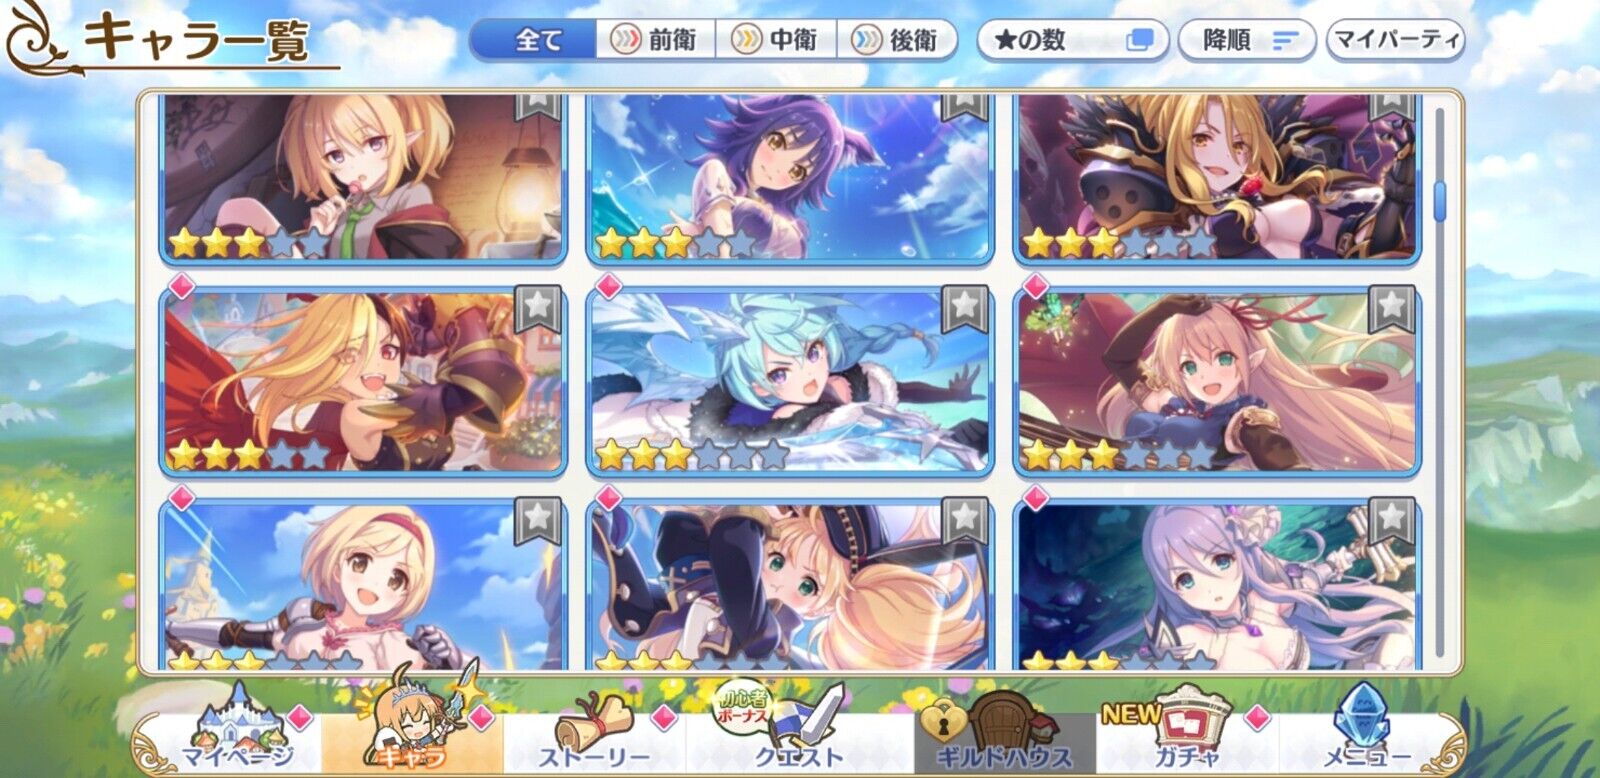 [JP][INSTANT] Priconne 36x3* +200k Jewels 6x3* tickets Starter Account Princess Connect Re:Dive-Mobile Games Starter